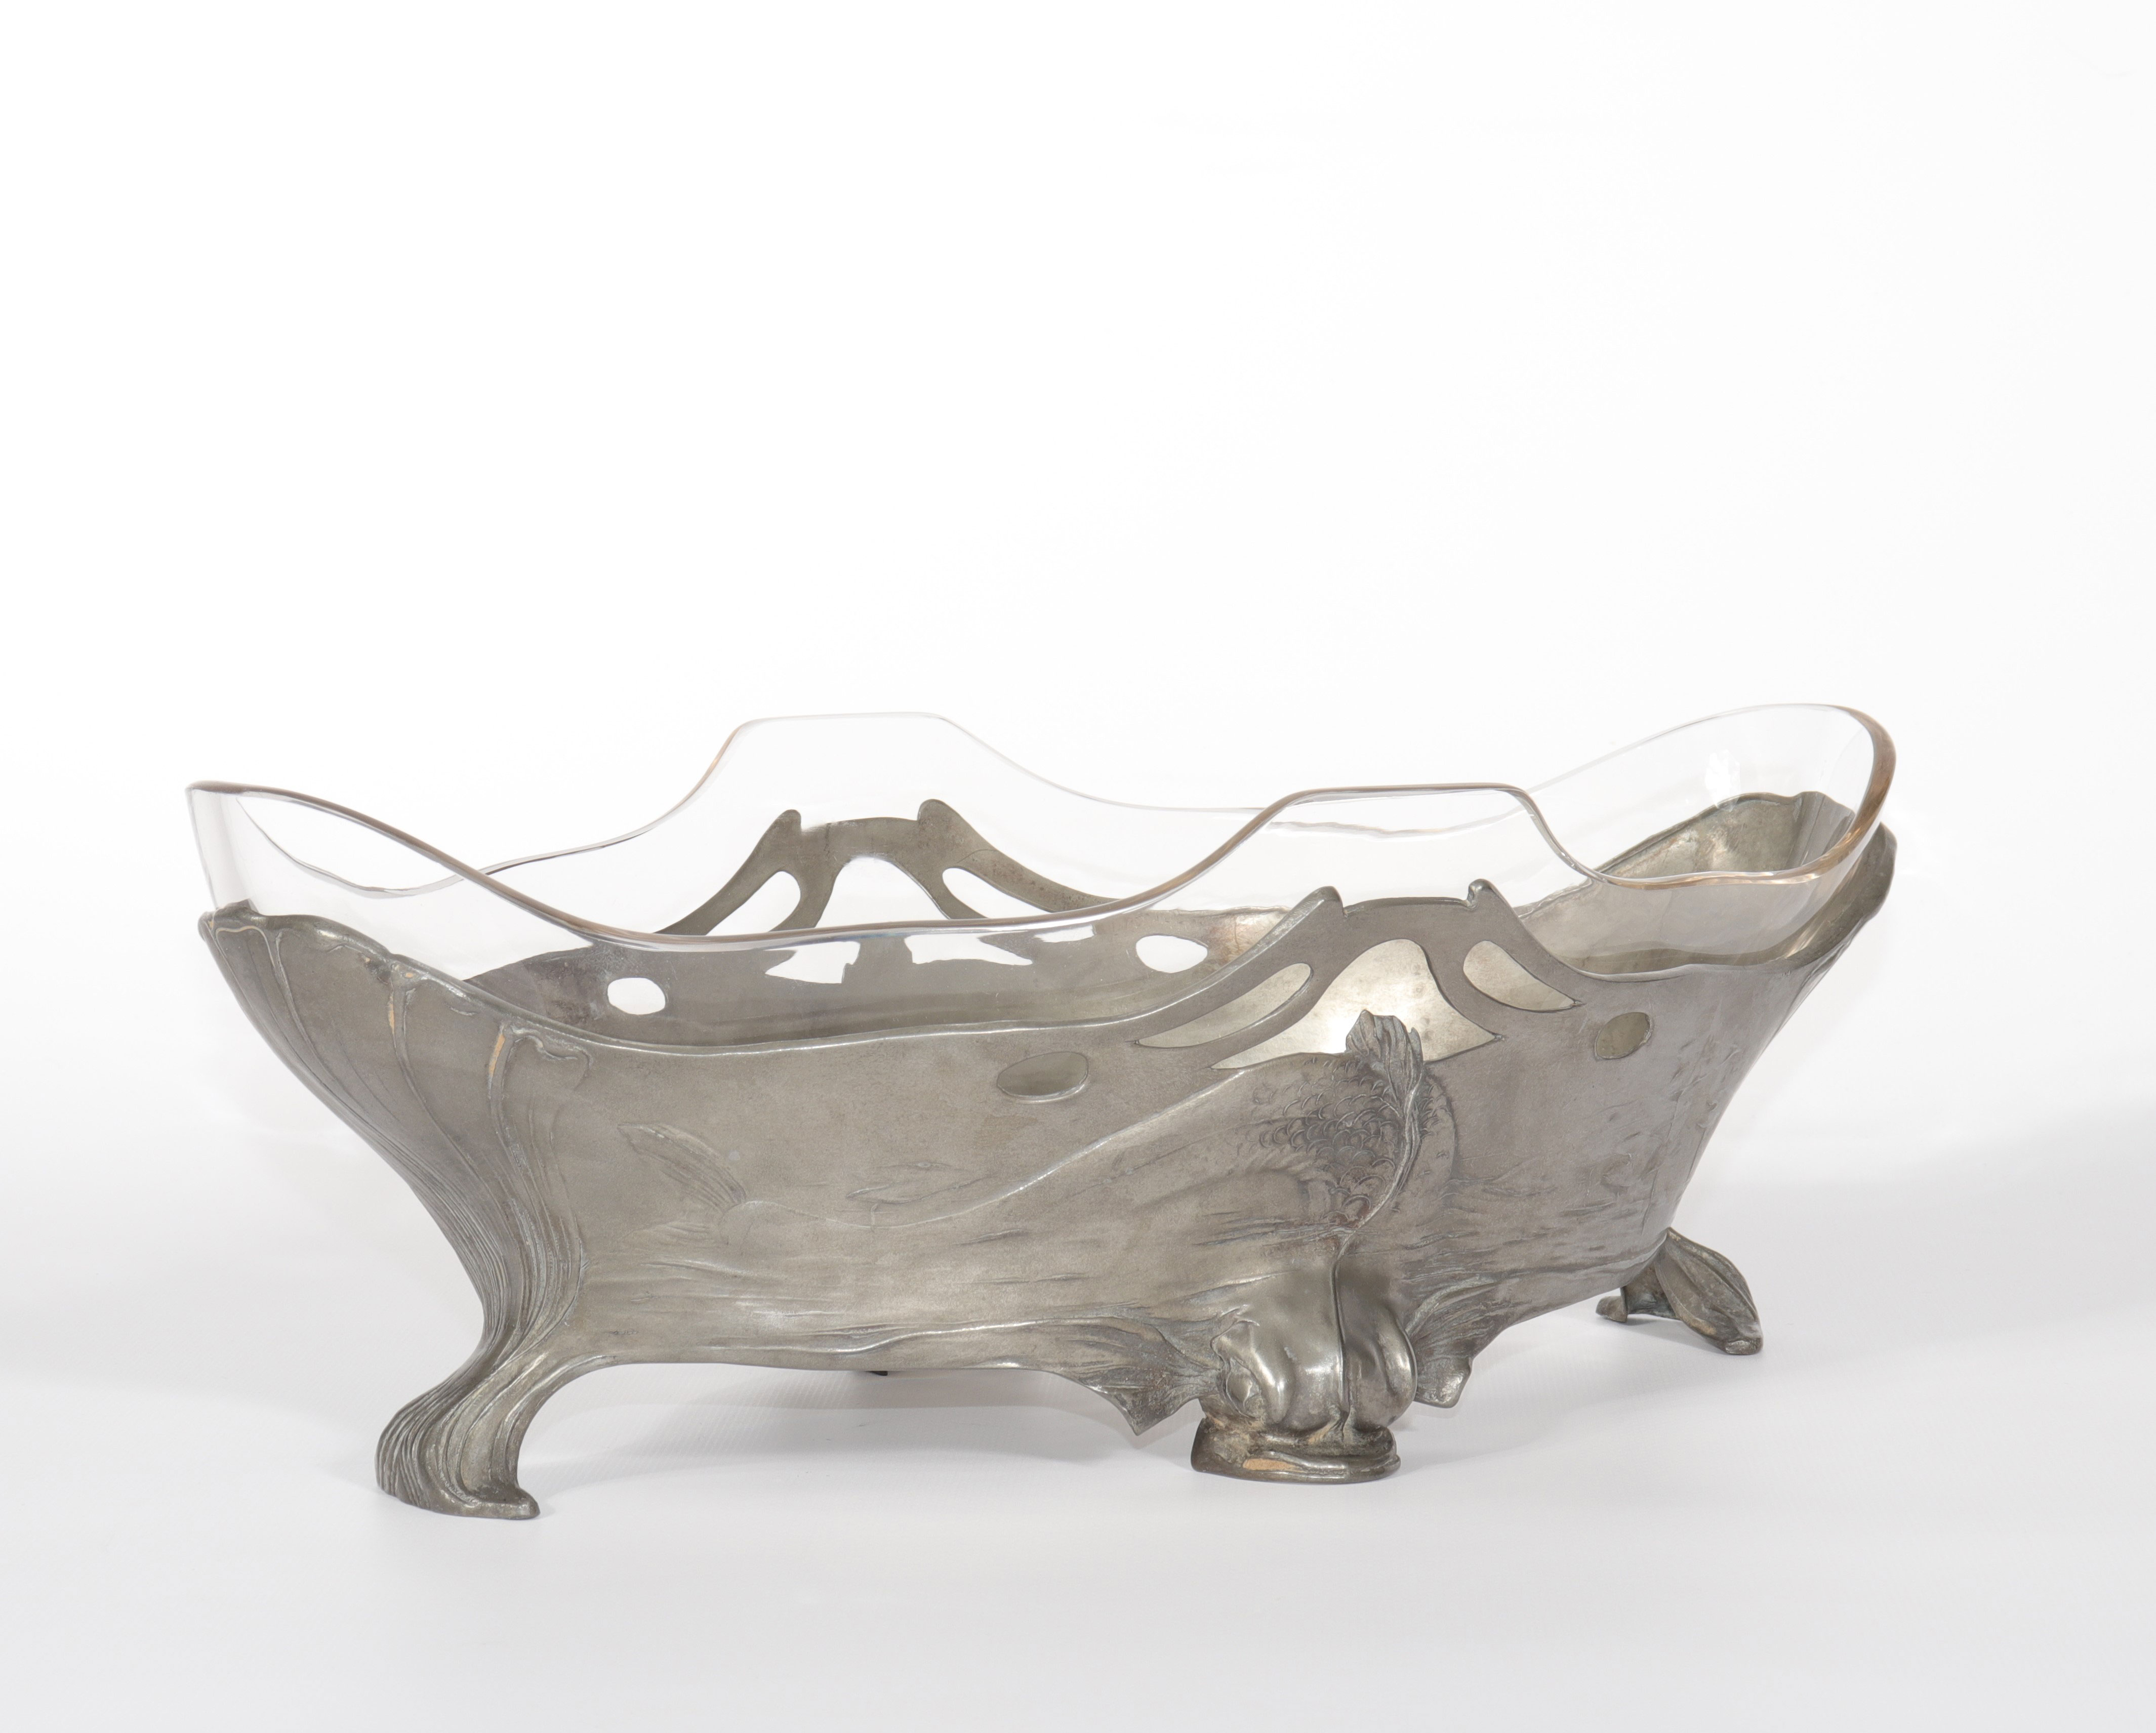 Art Nouveau planter in the shape of dolphins circa 1900 - Image 2 of 4